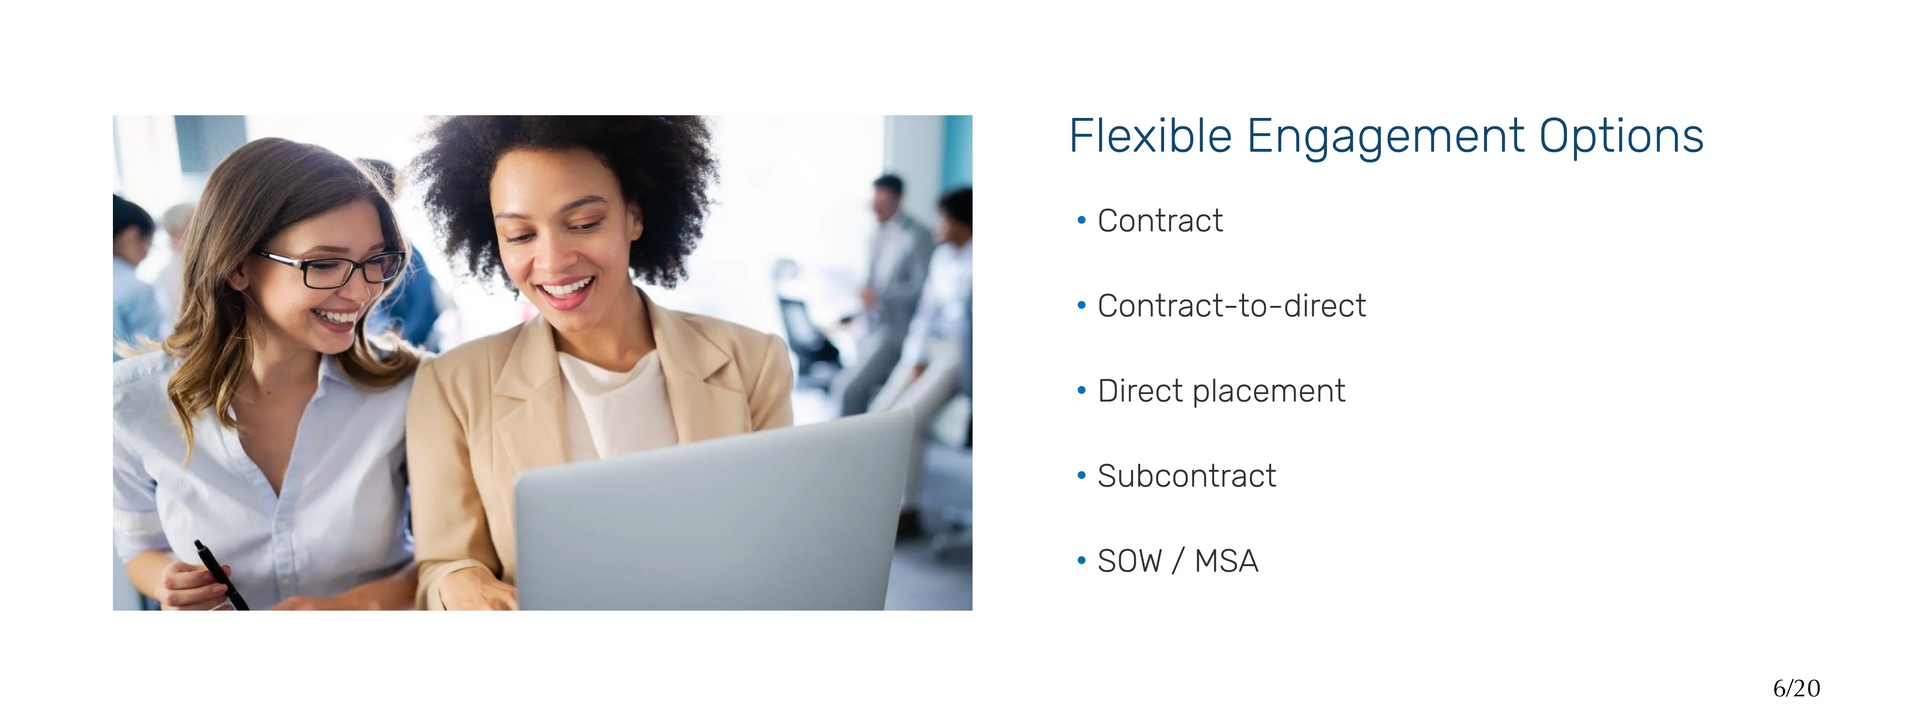 Elite Technical offers flexible engagements, direct placements, contract to hire, contract, SOW, MSA and subcontract